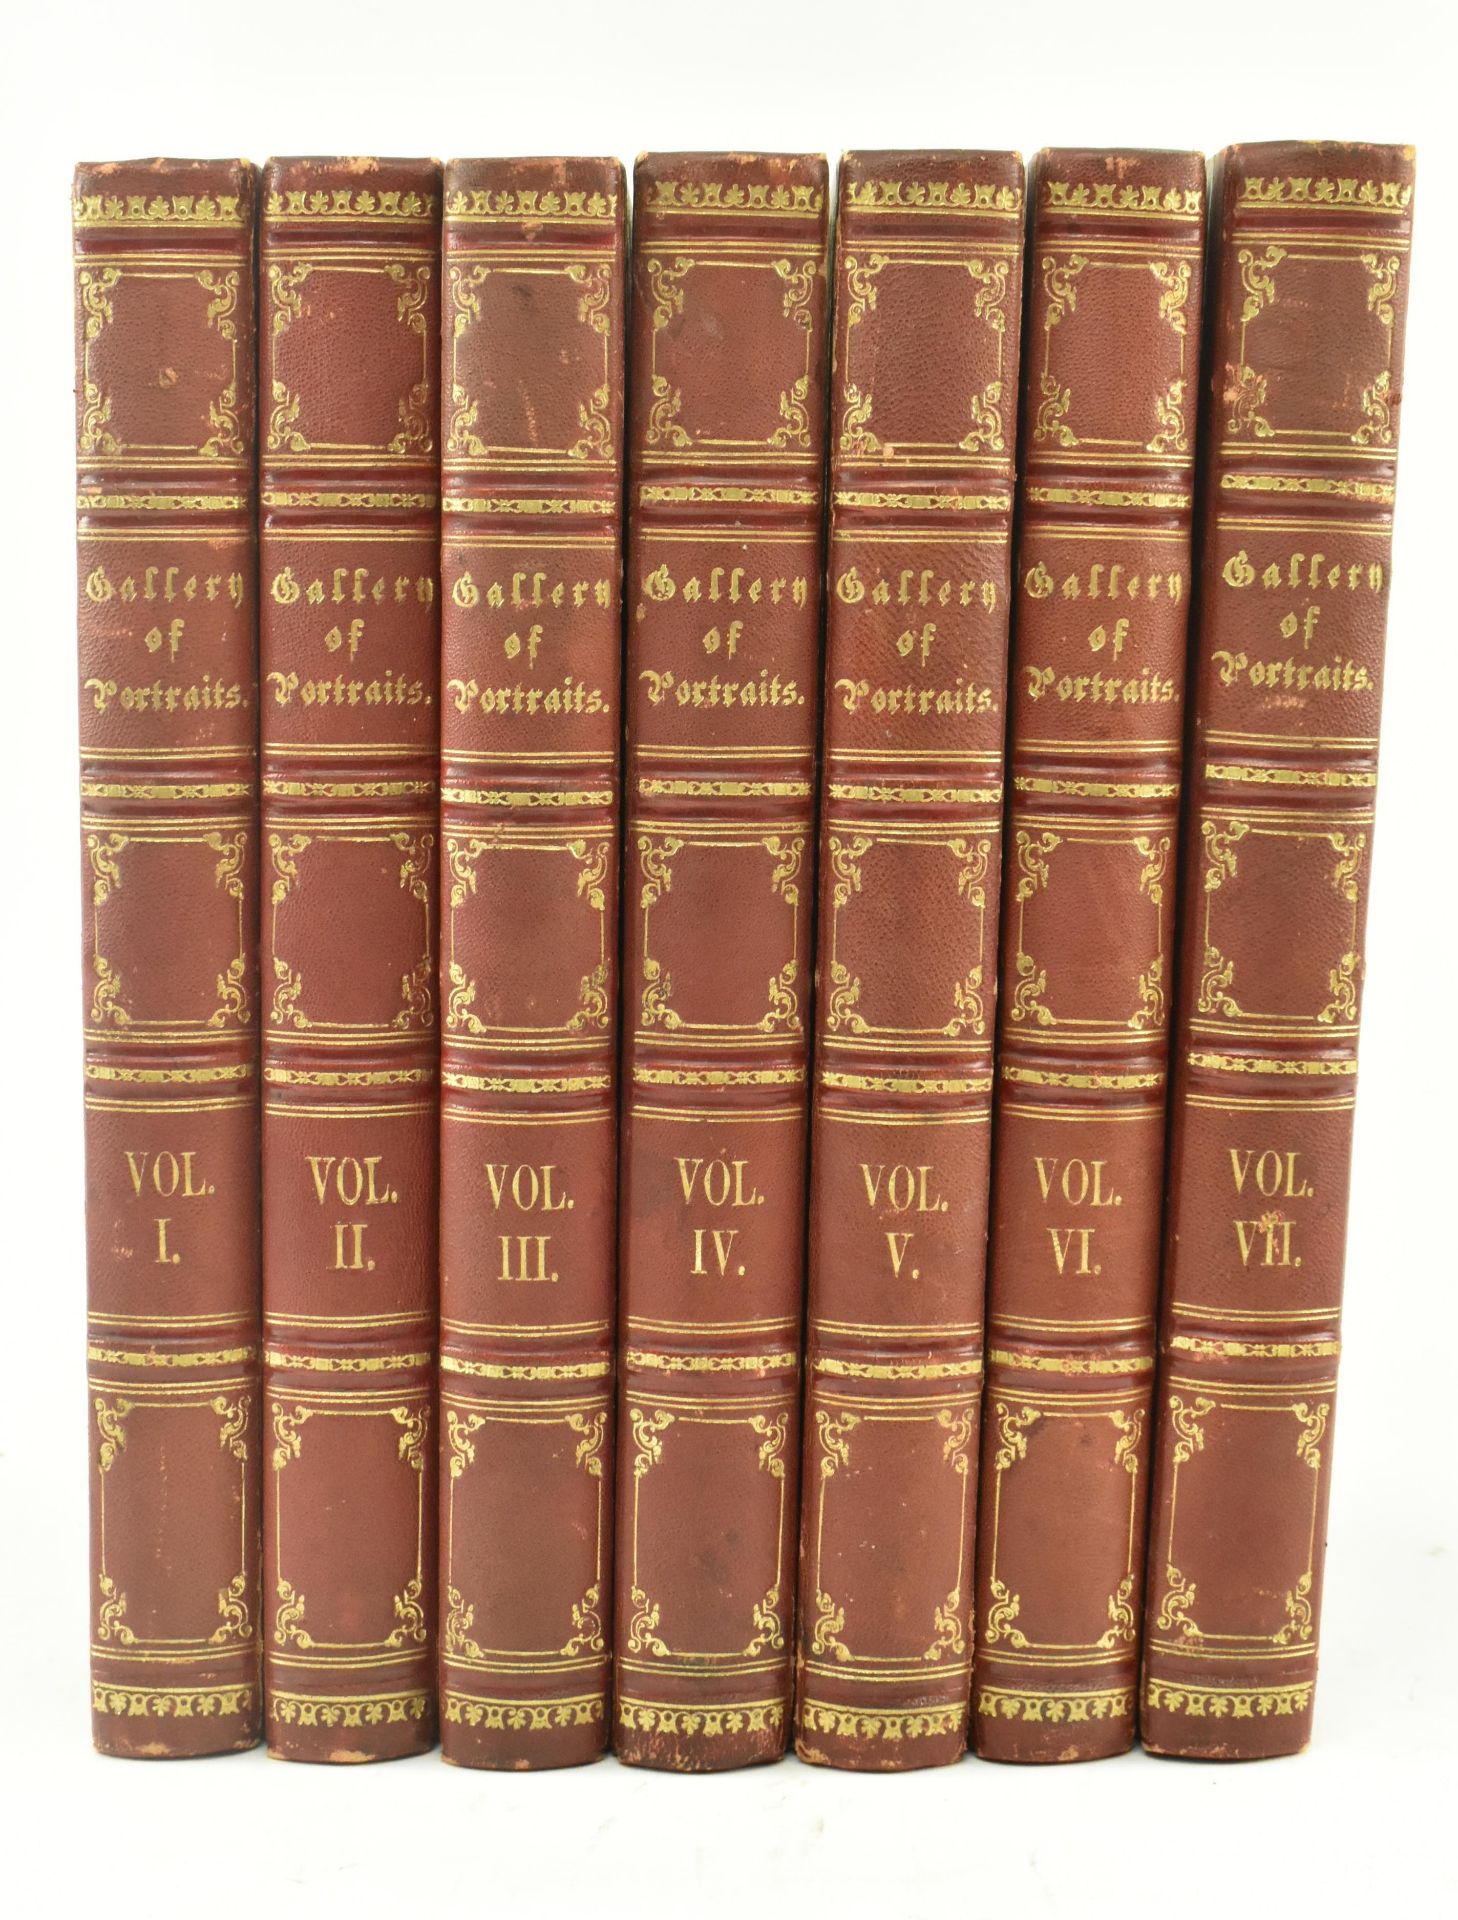 1833 SIX VOLUME THE GALLERY OF PORTRAITS PUBL. CHARLES KNIGHT - Image 2 of 10